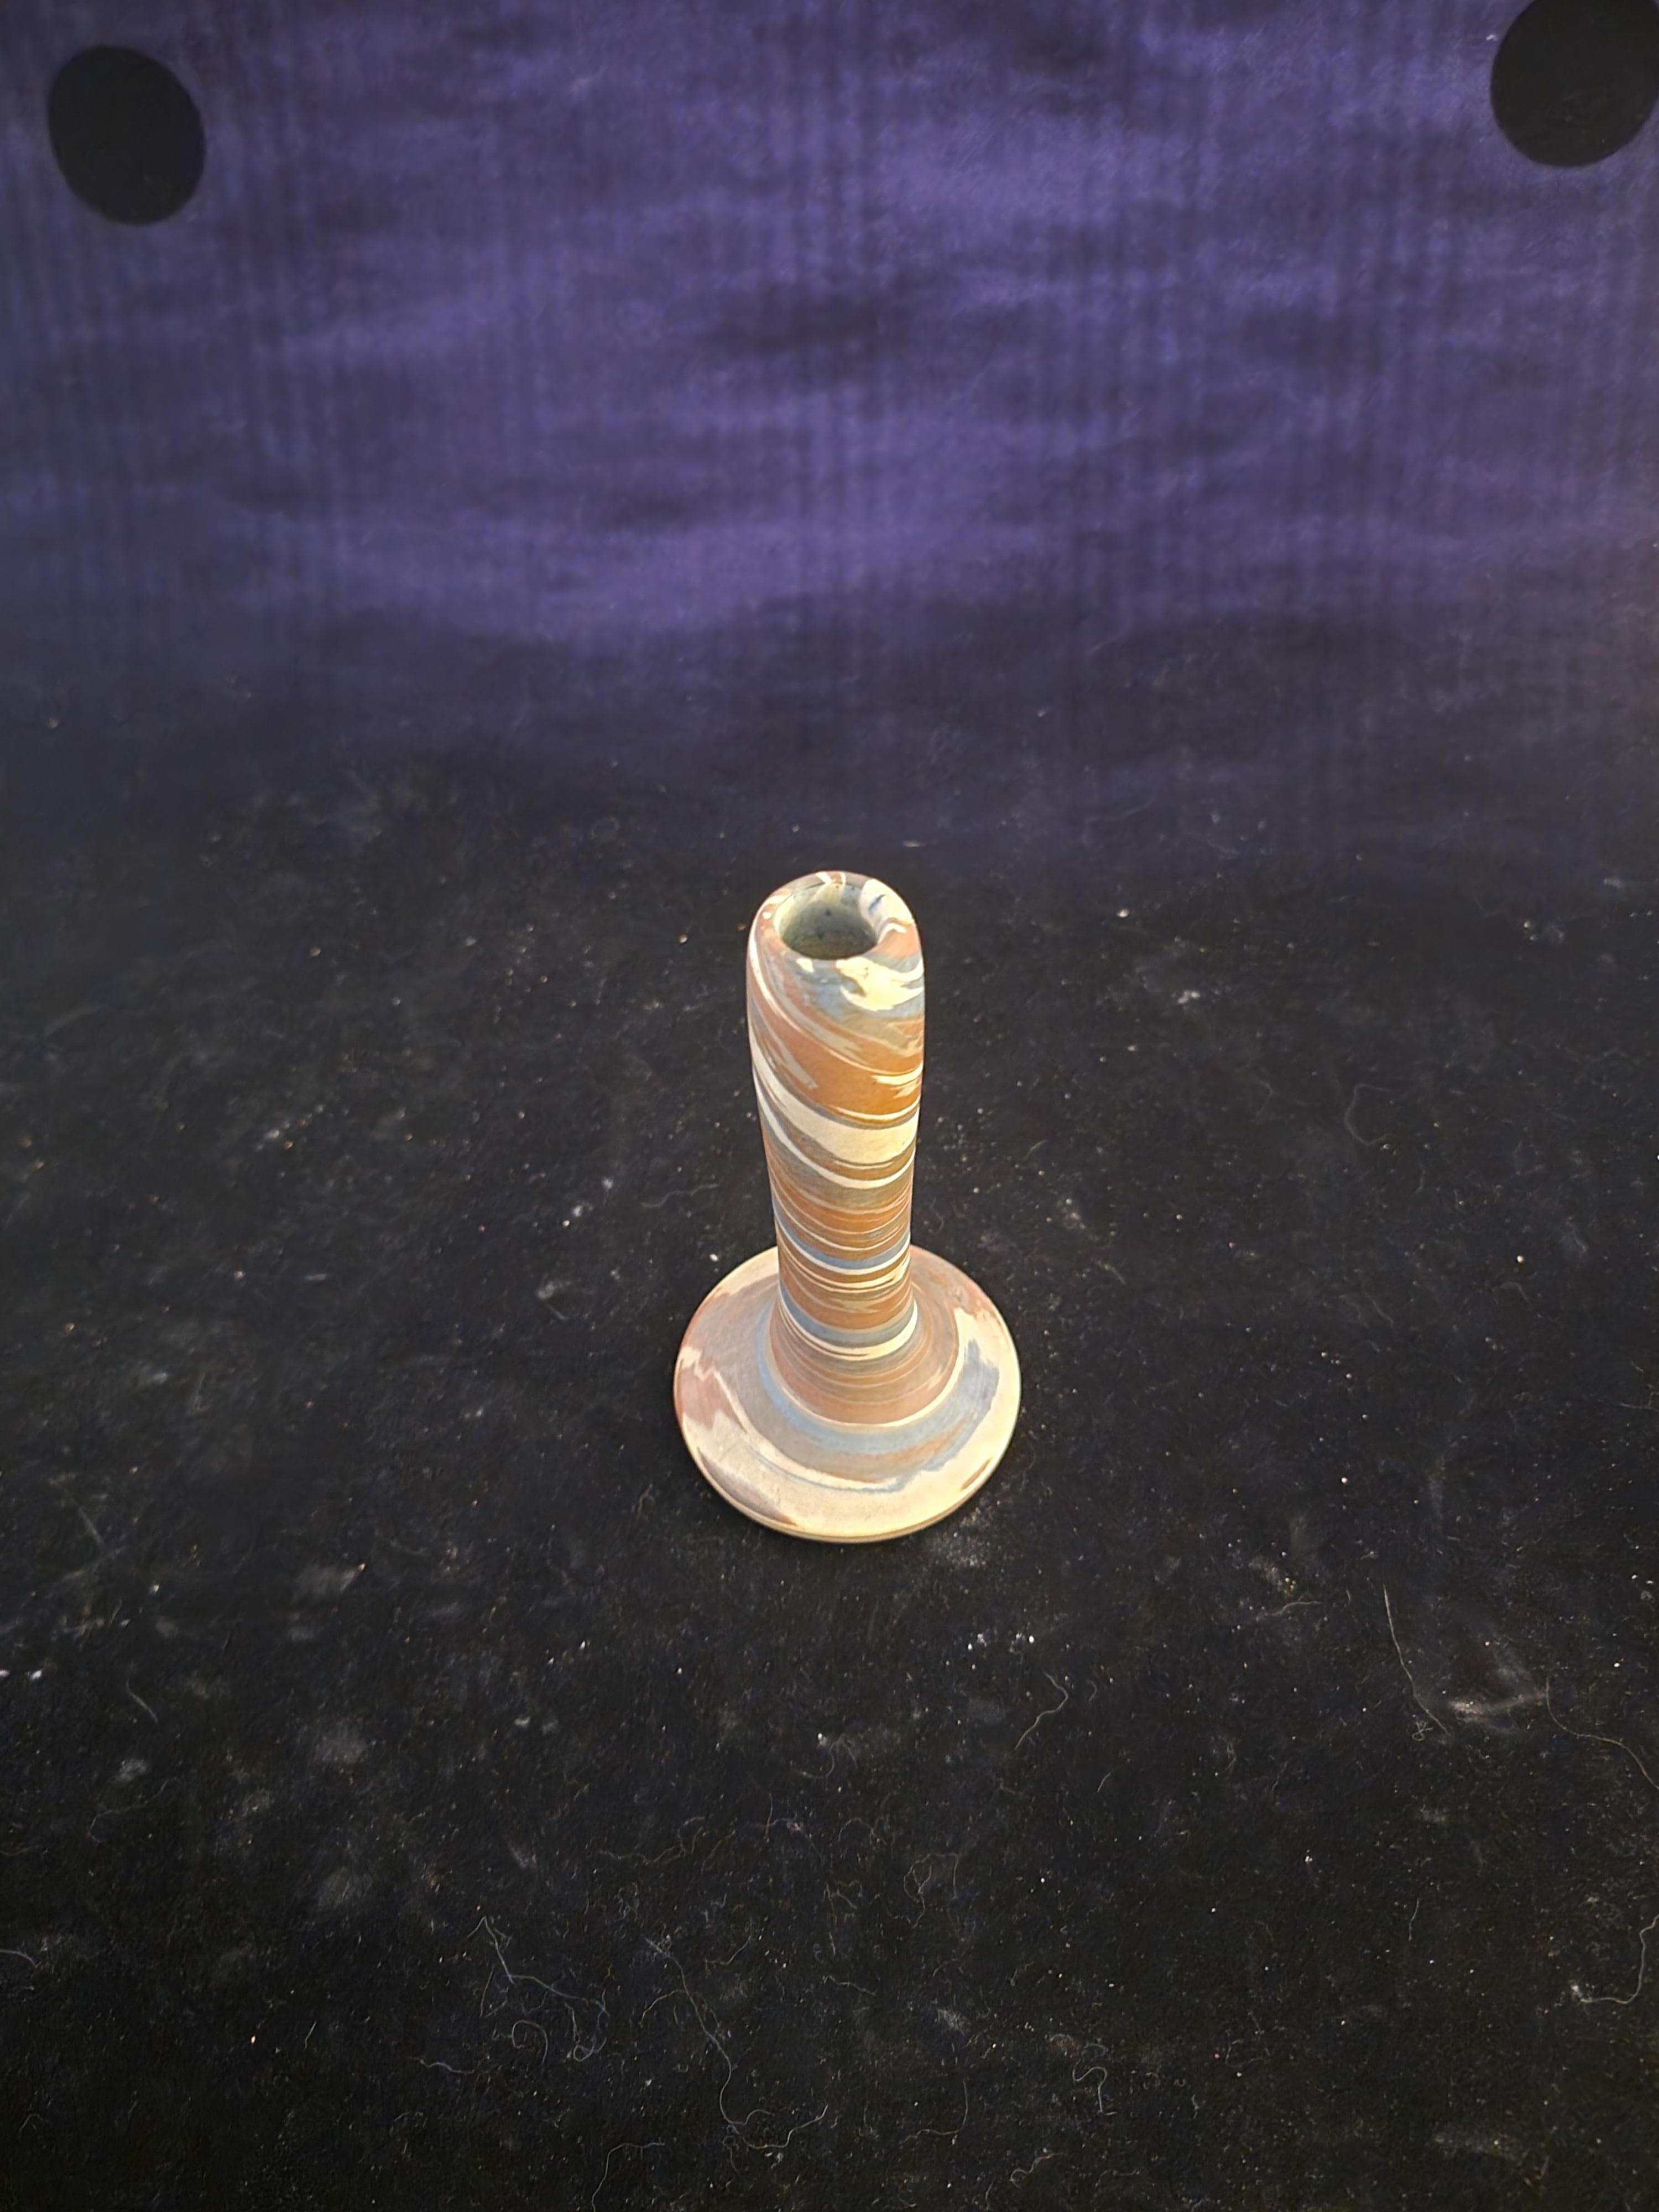 This is a rare Niloak Piece of Pottery there was not a category in our great list for Niloak. It is Mission Swirl. This is a rare, delicately fashioned piece for Niloak Mission arts Swirl. It is a bud vase that will grace a nightstand, a breakfast